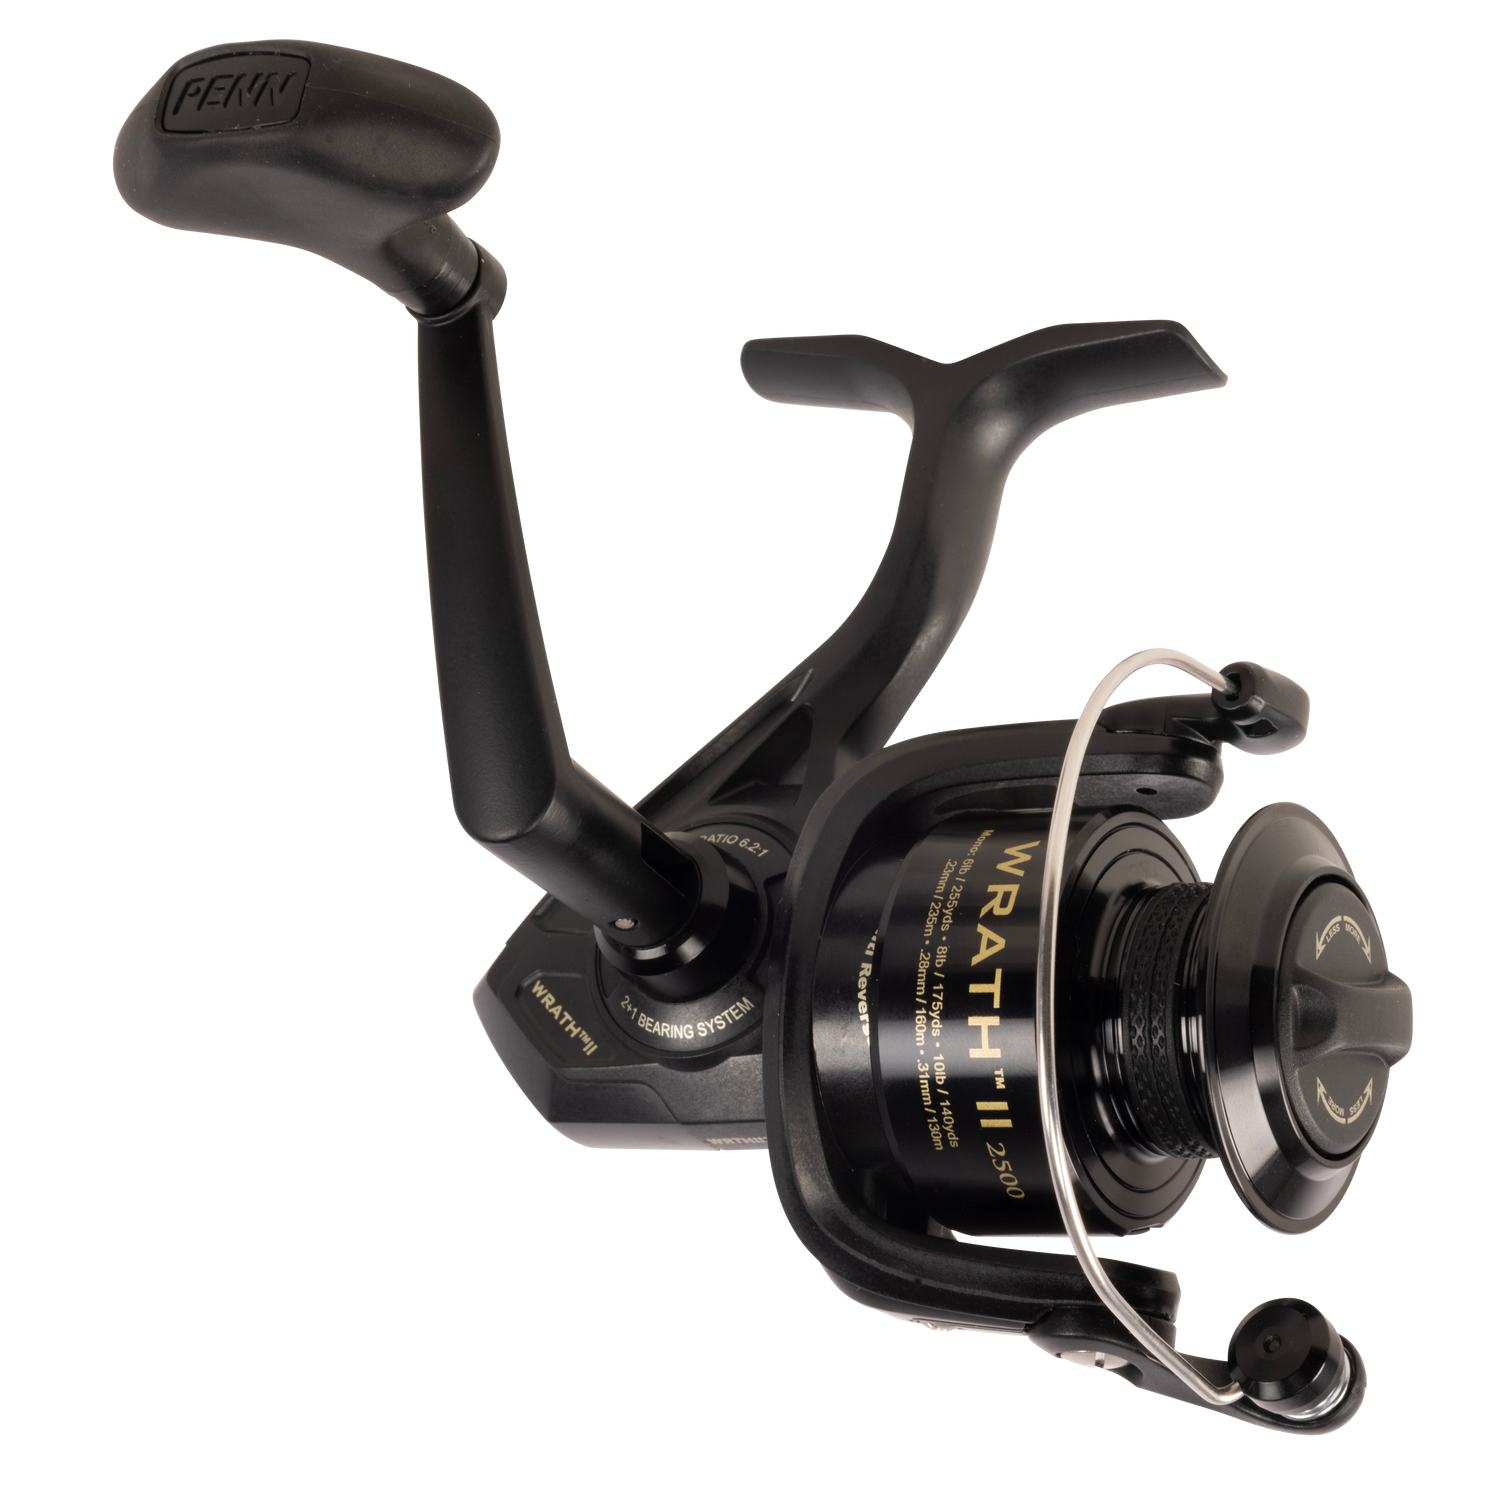 Fishing Reels For Sale - Shop for Spin, Overhead, Baitcast & more Page 6